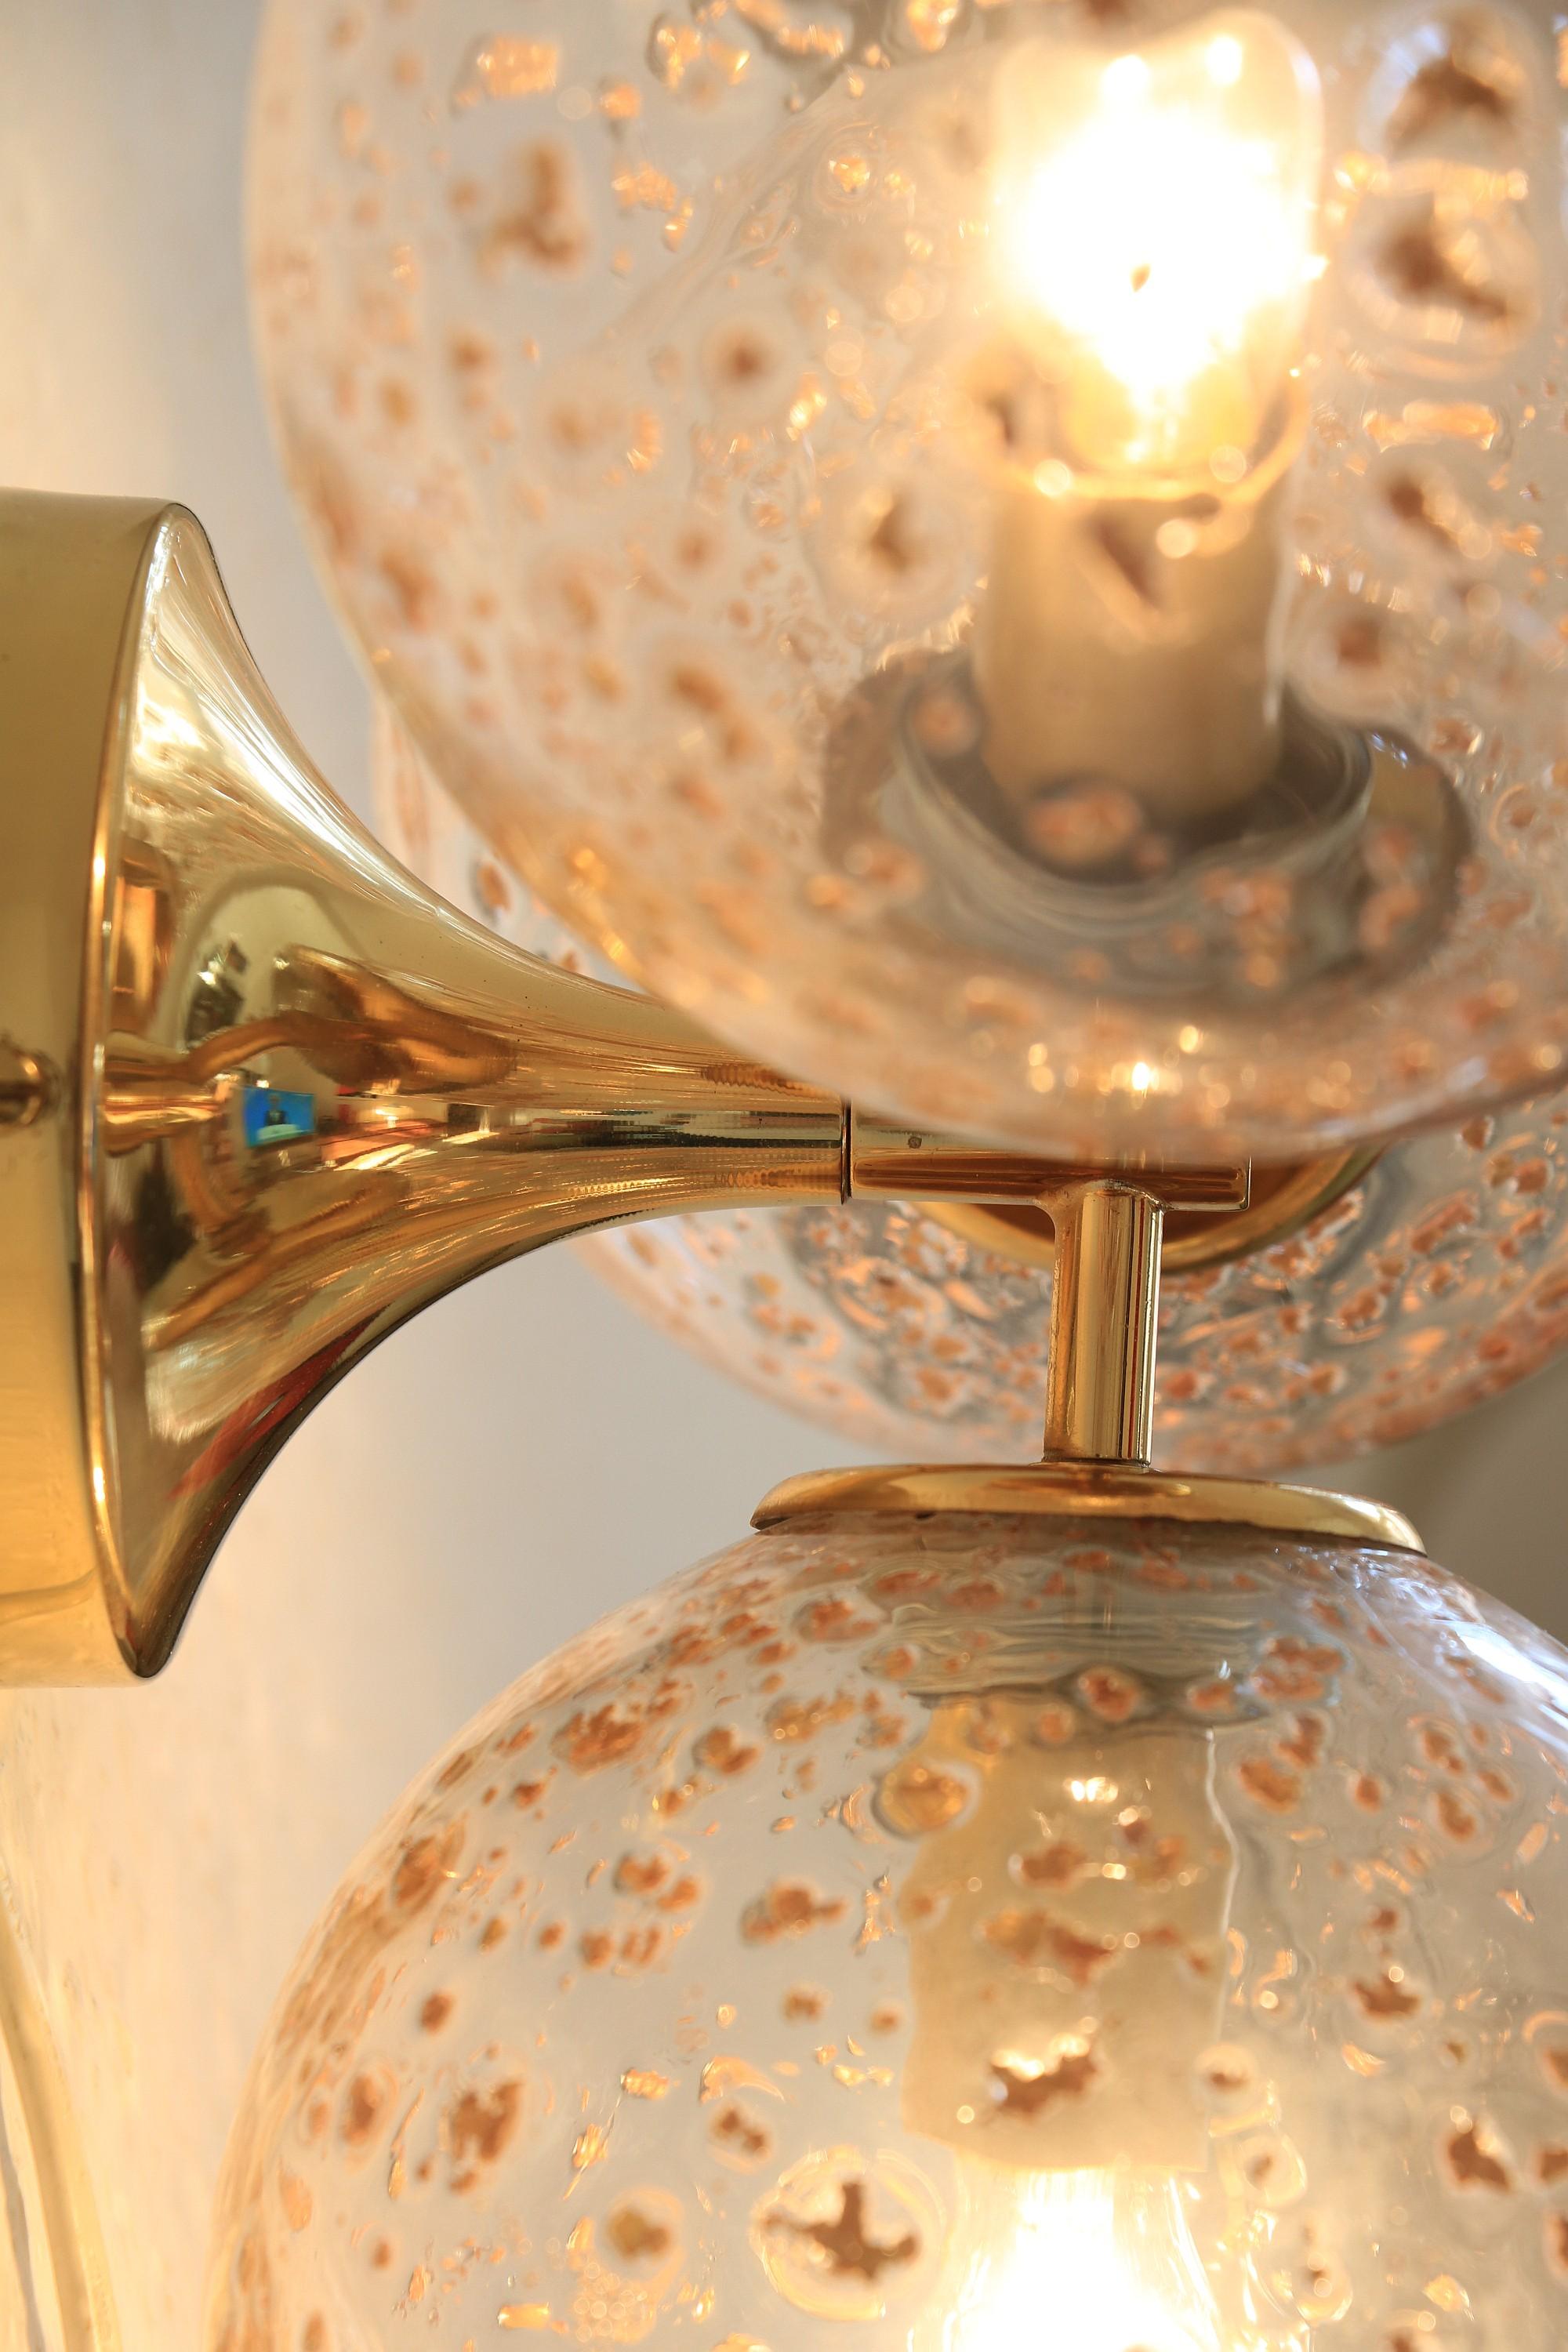 Sputnik wall or ceiling lamp with three glass balls and gold inclusions.
The glass is high quality and mouthblown.
 
Manufacturer: Temde, Switzerland
 
Diameter total: 35 cm / 13.77 inches
Diameter ball: 15 cm / 5.9 inches
Depth: 18 cm / 7.08